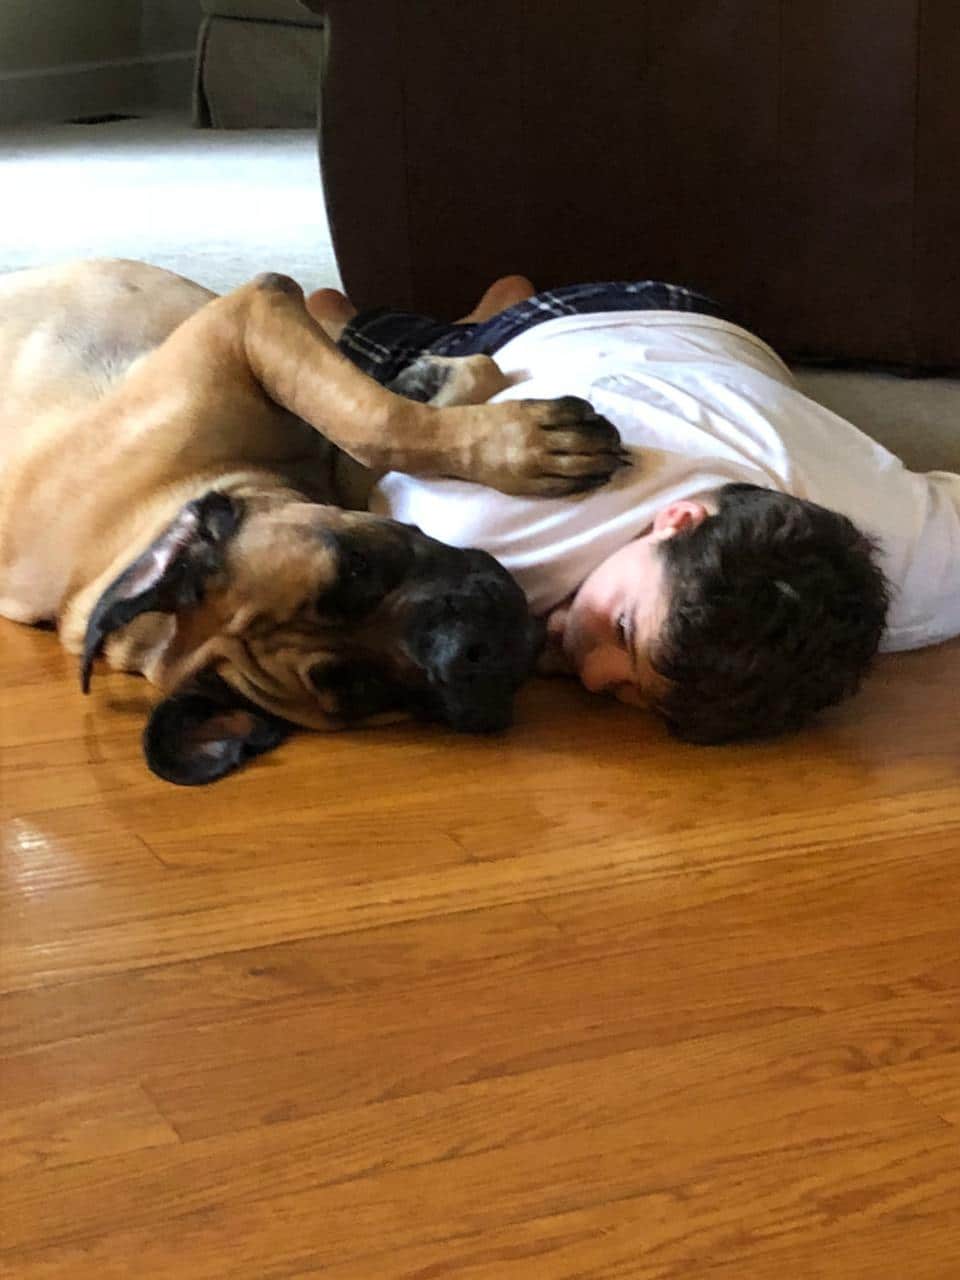 a boy and his dog are napping together on the floor